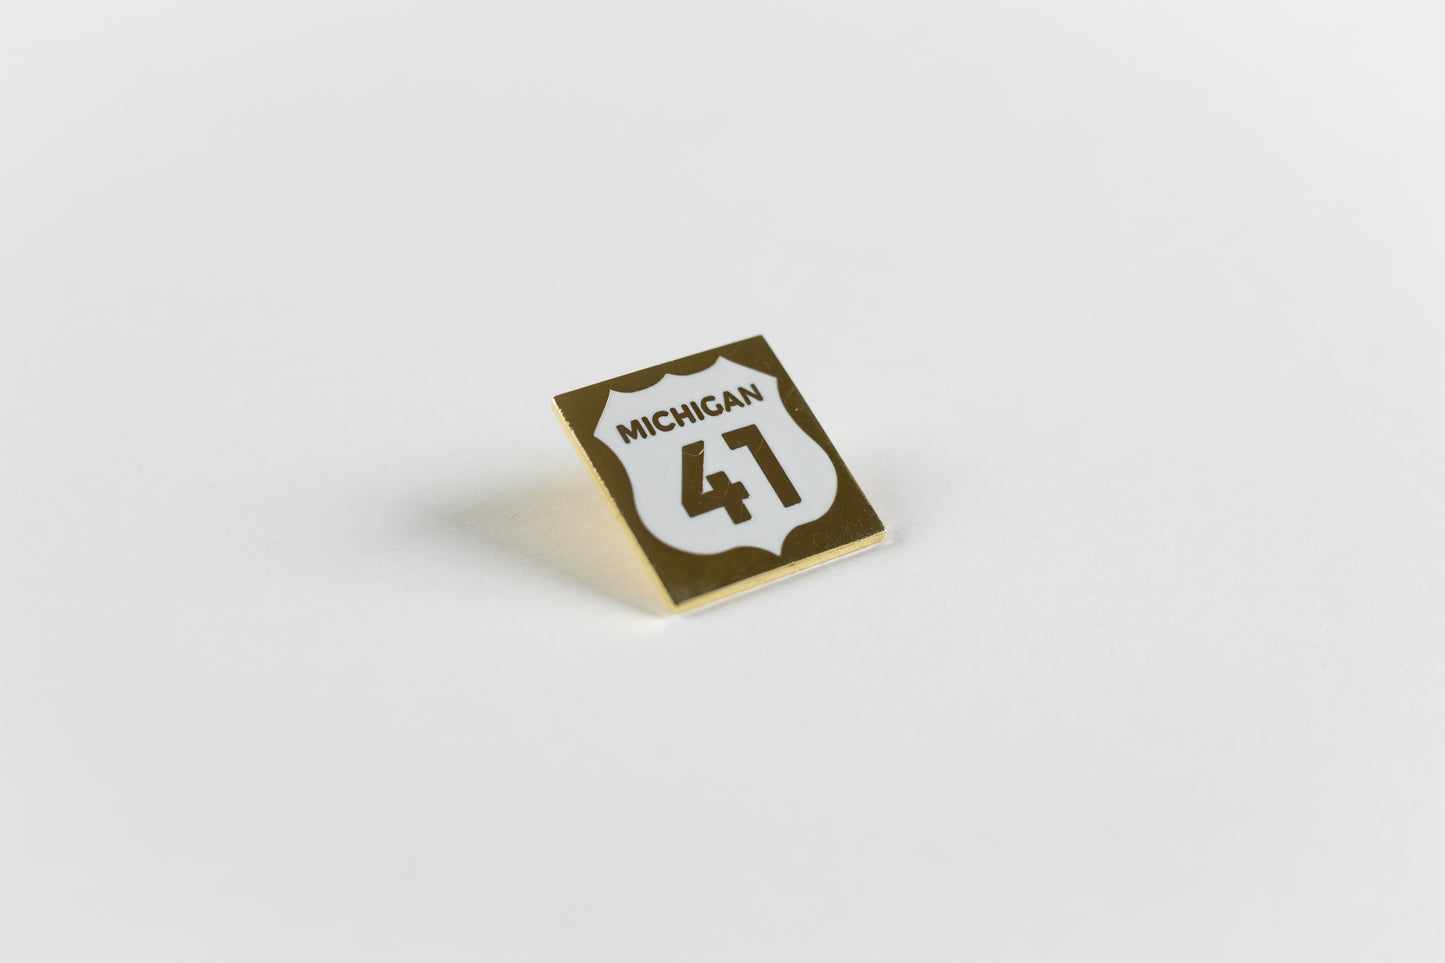 US Highway Michigan 41 Copper Country Trail Enamel Pin